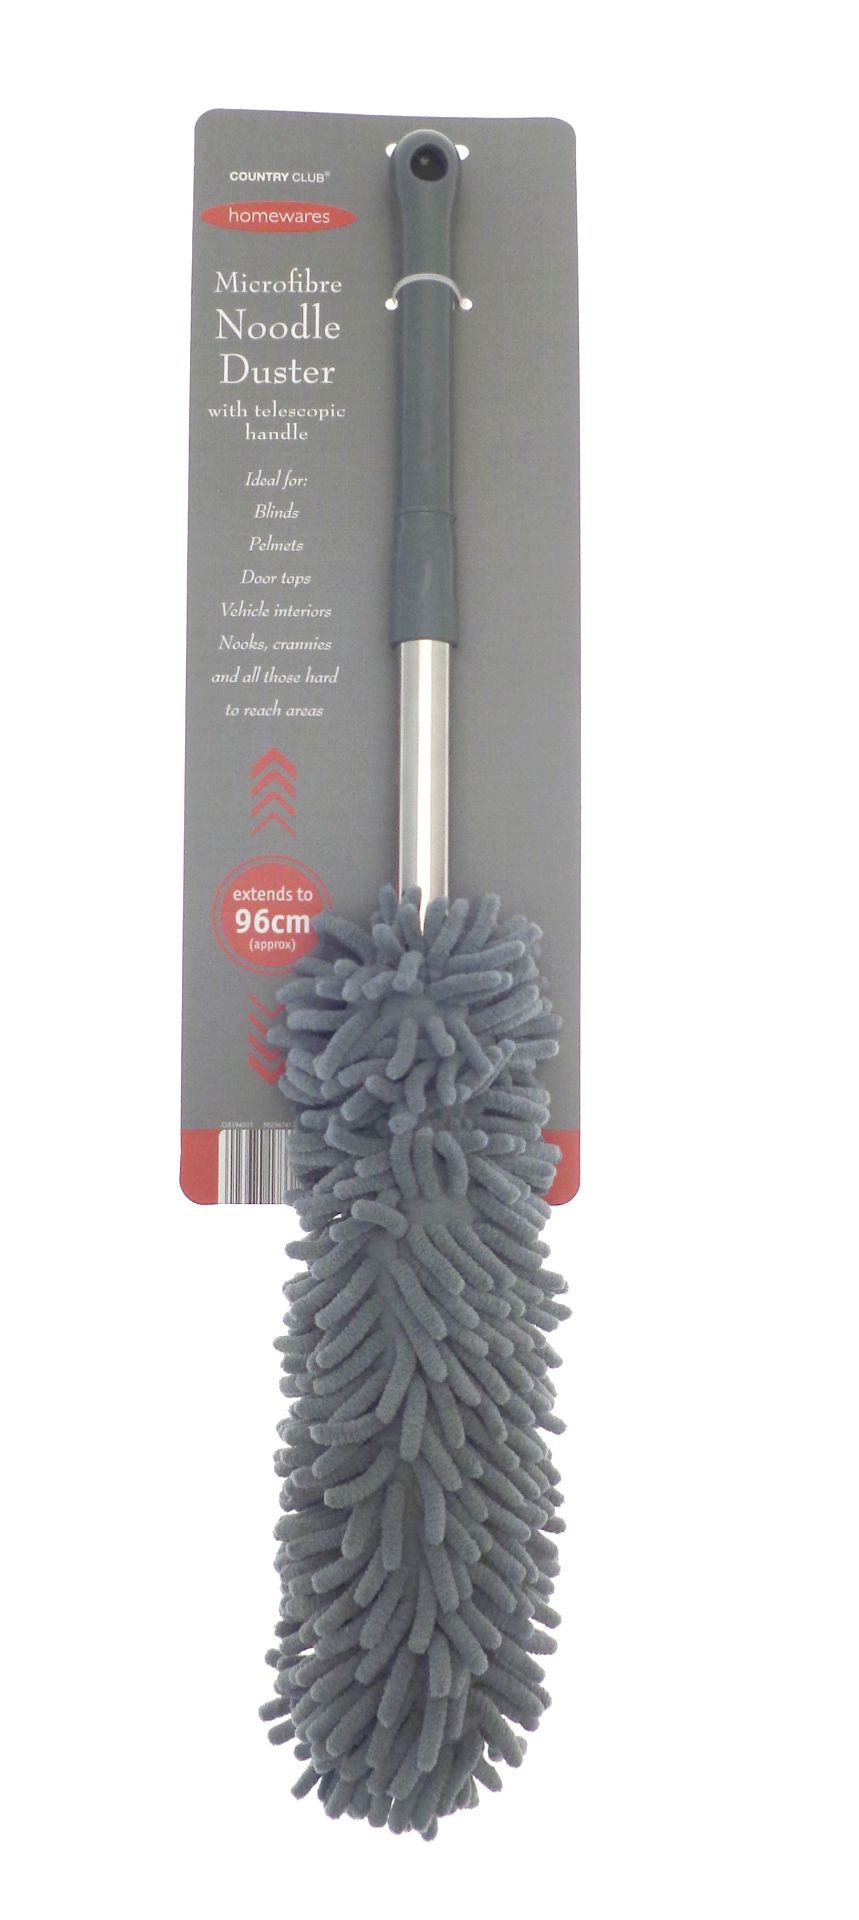 New Extending Grey Noodle Microfibre Duster Up To 96cm